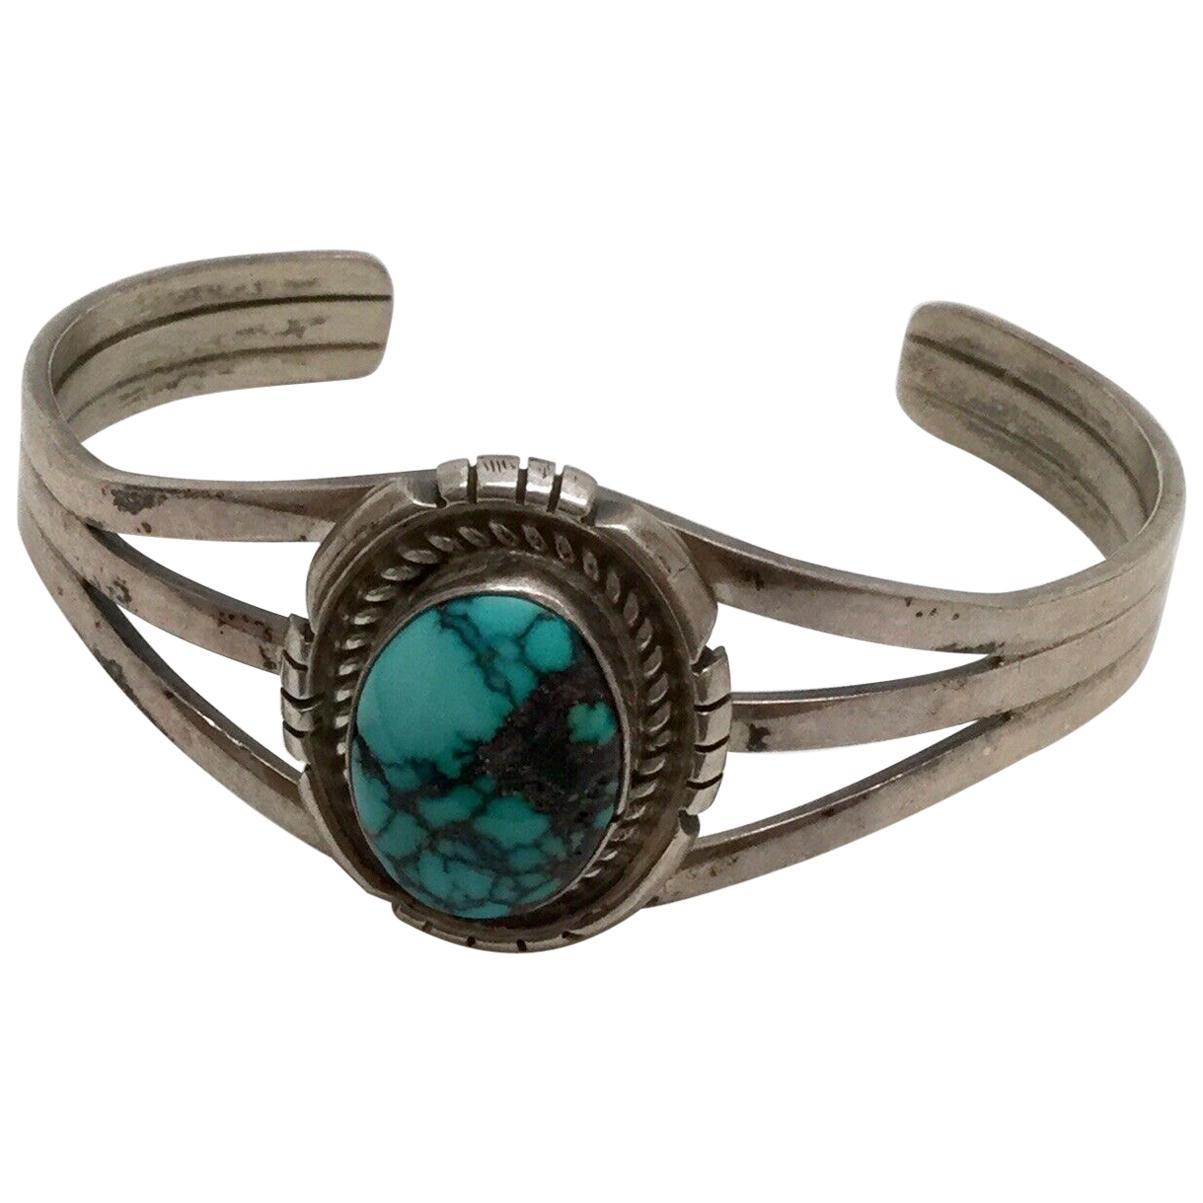 Native American Navajo Johnny Johnson Sterling Silver Turquoise Cuff Bracelet